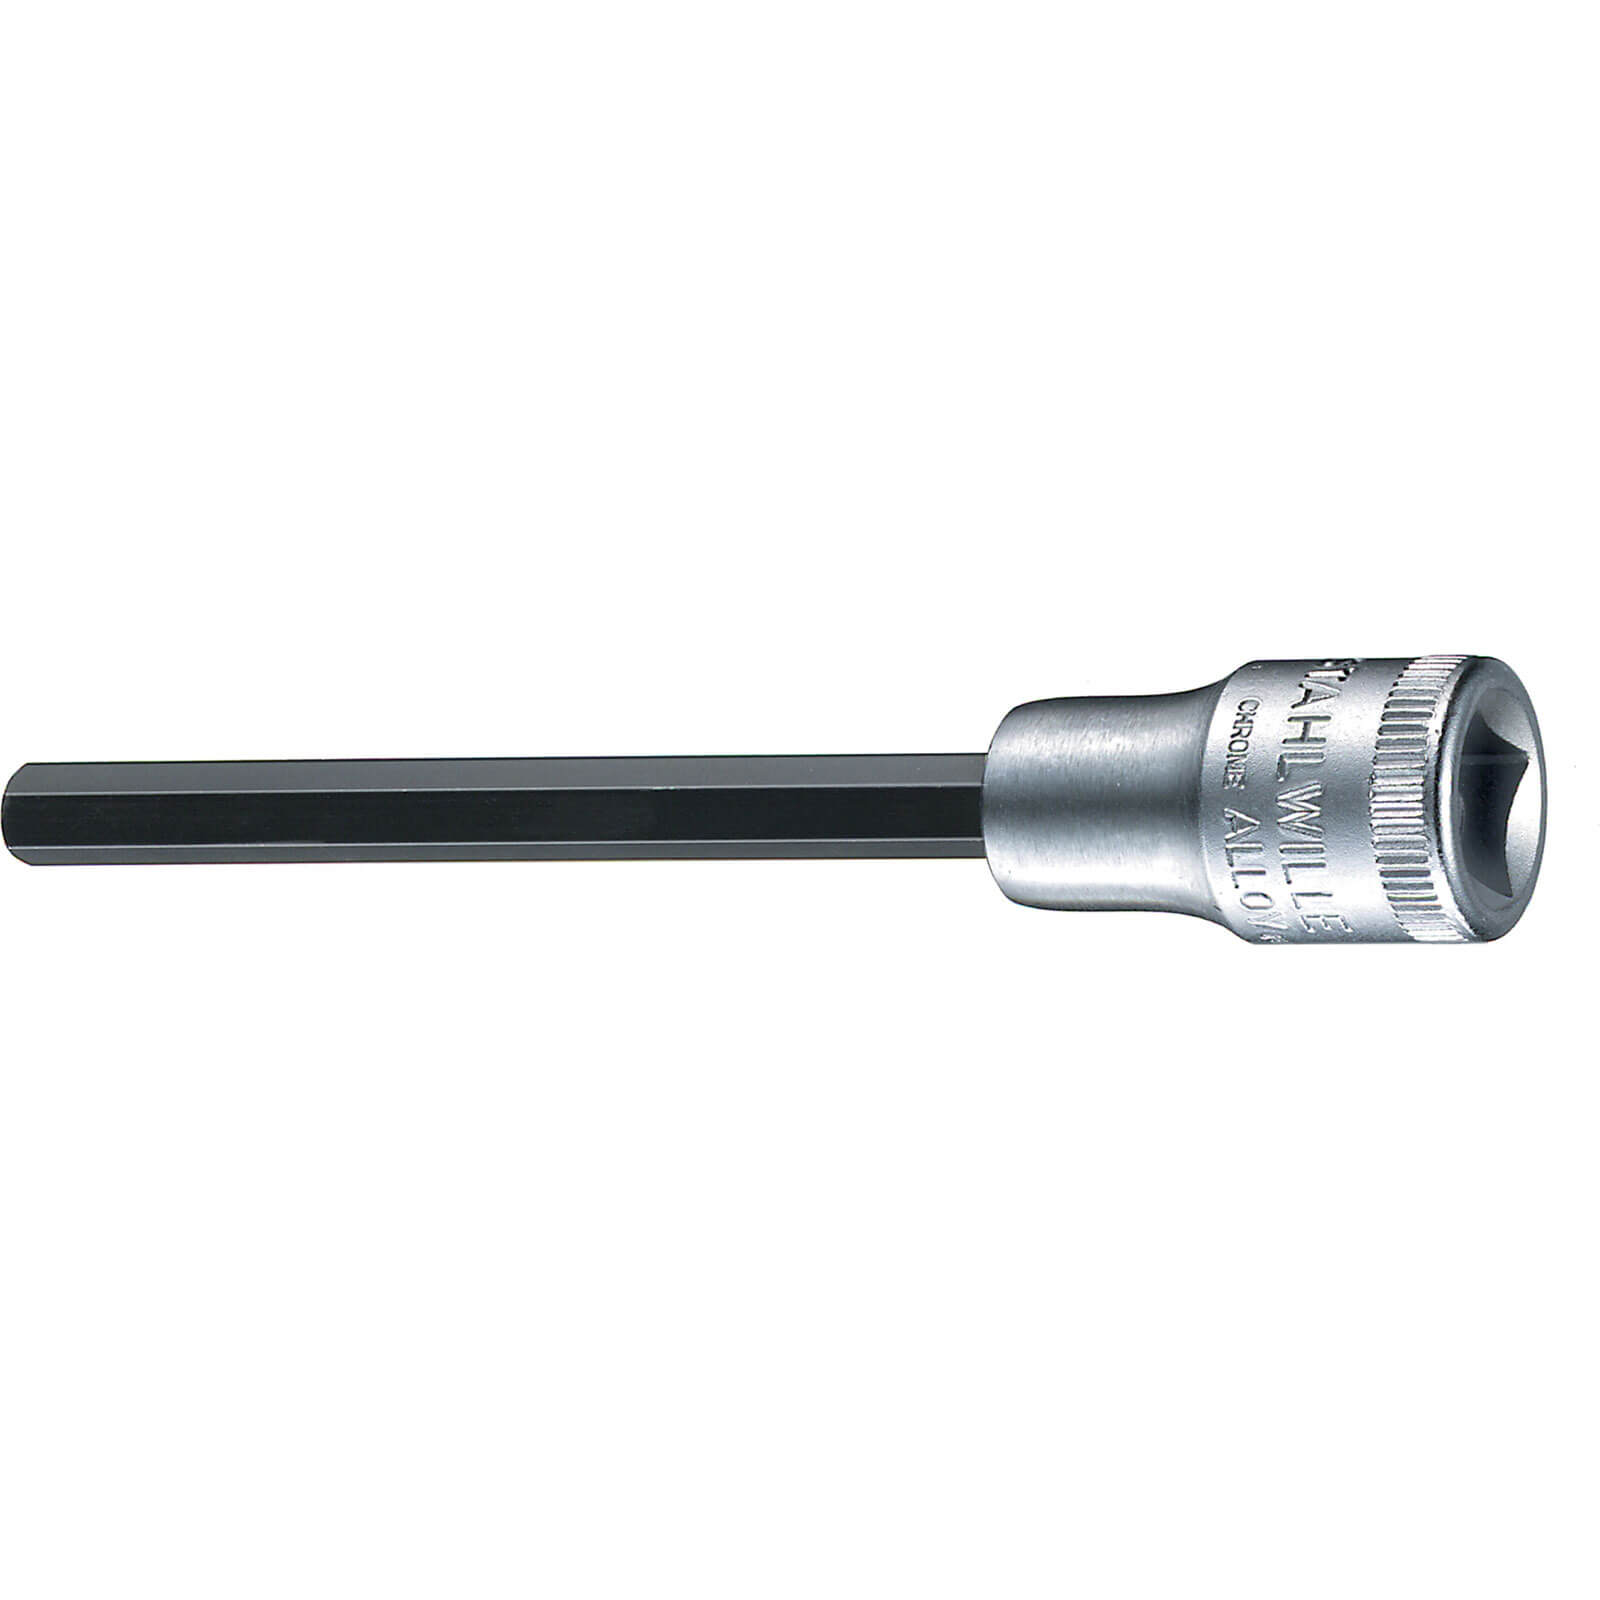 Image of Stahlwille 3/8" Drive Extra Long Hexagon Socket Bit 3/8" 5mm